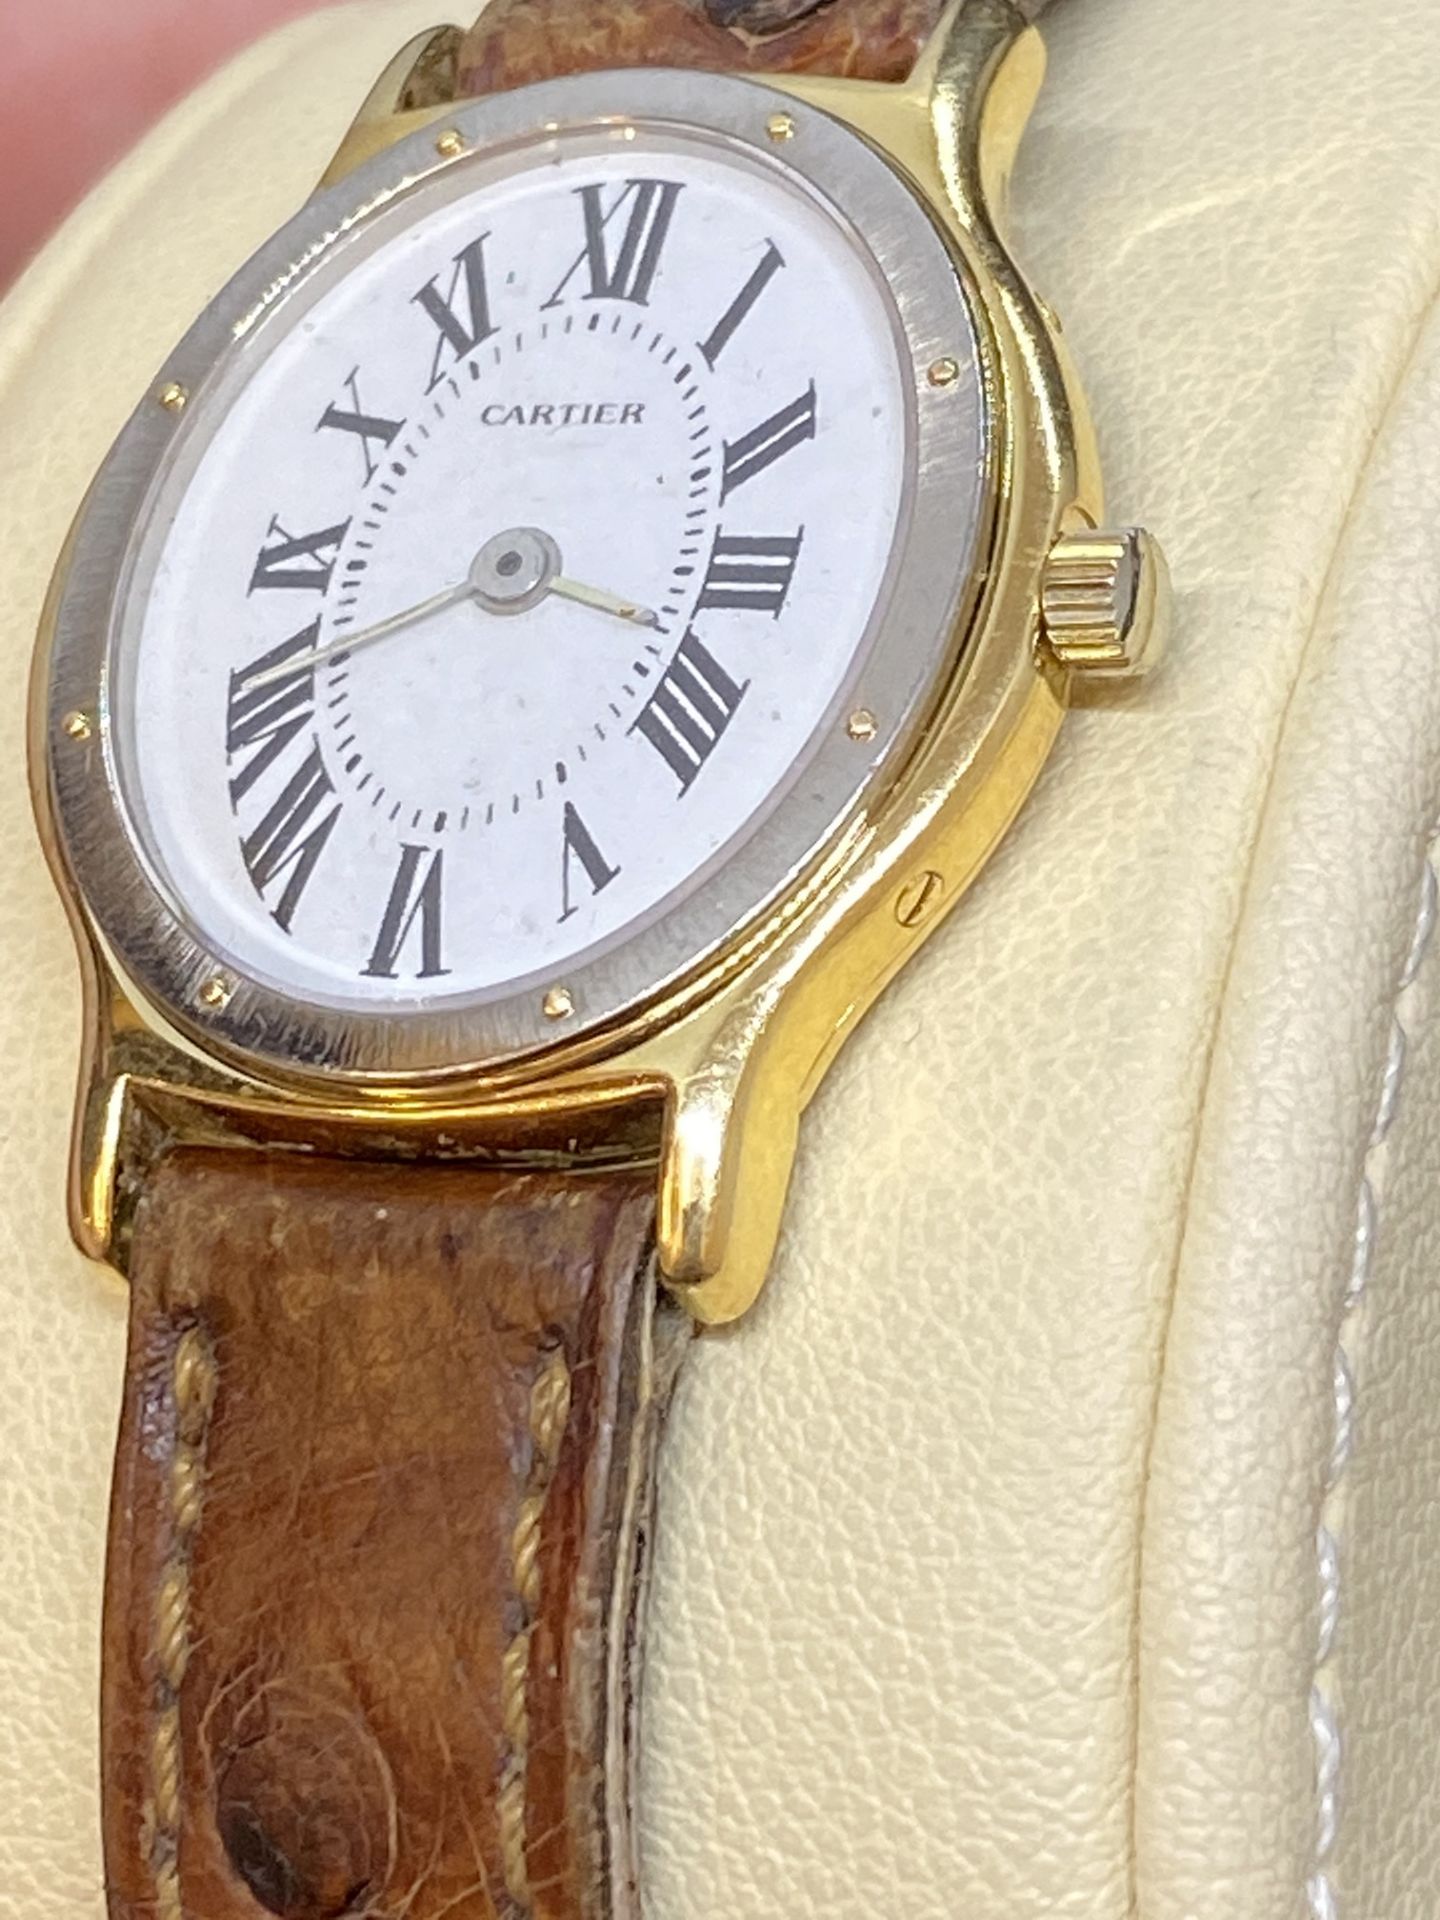 CARTIER WHITE & YELLOW 18ct GOLD WATCH - Image 7 of 9